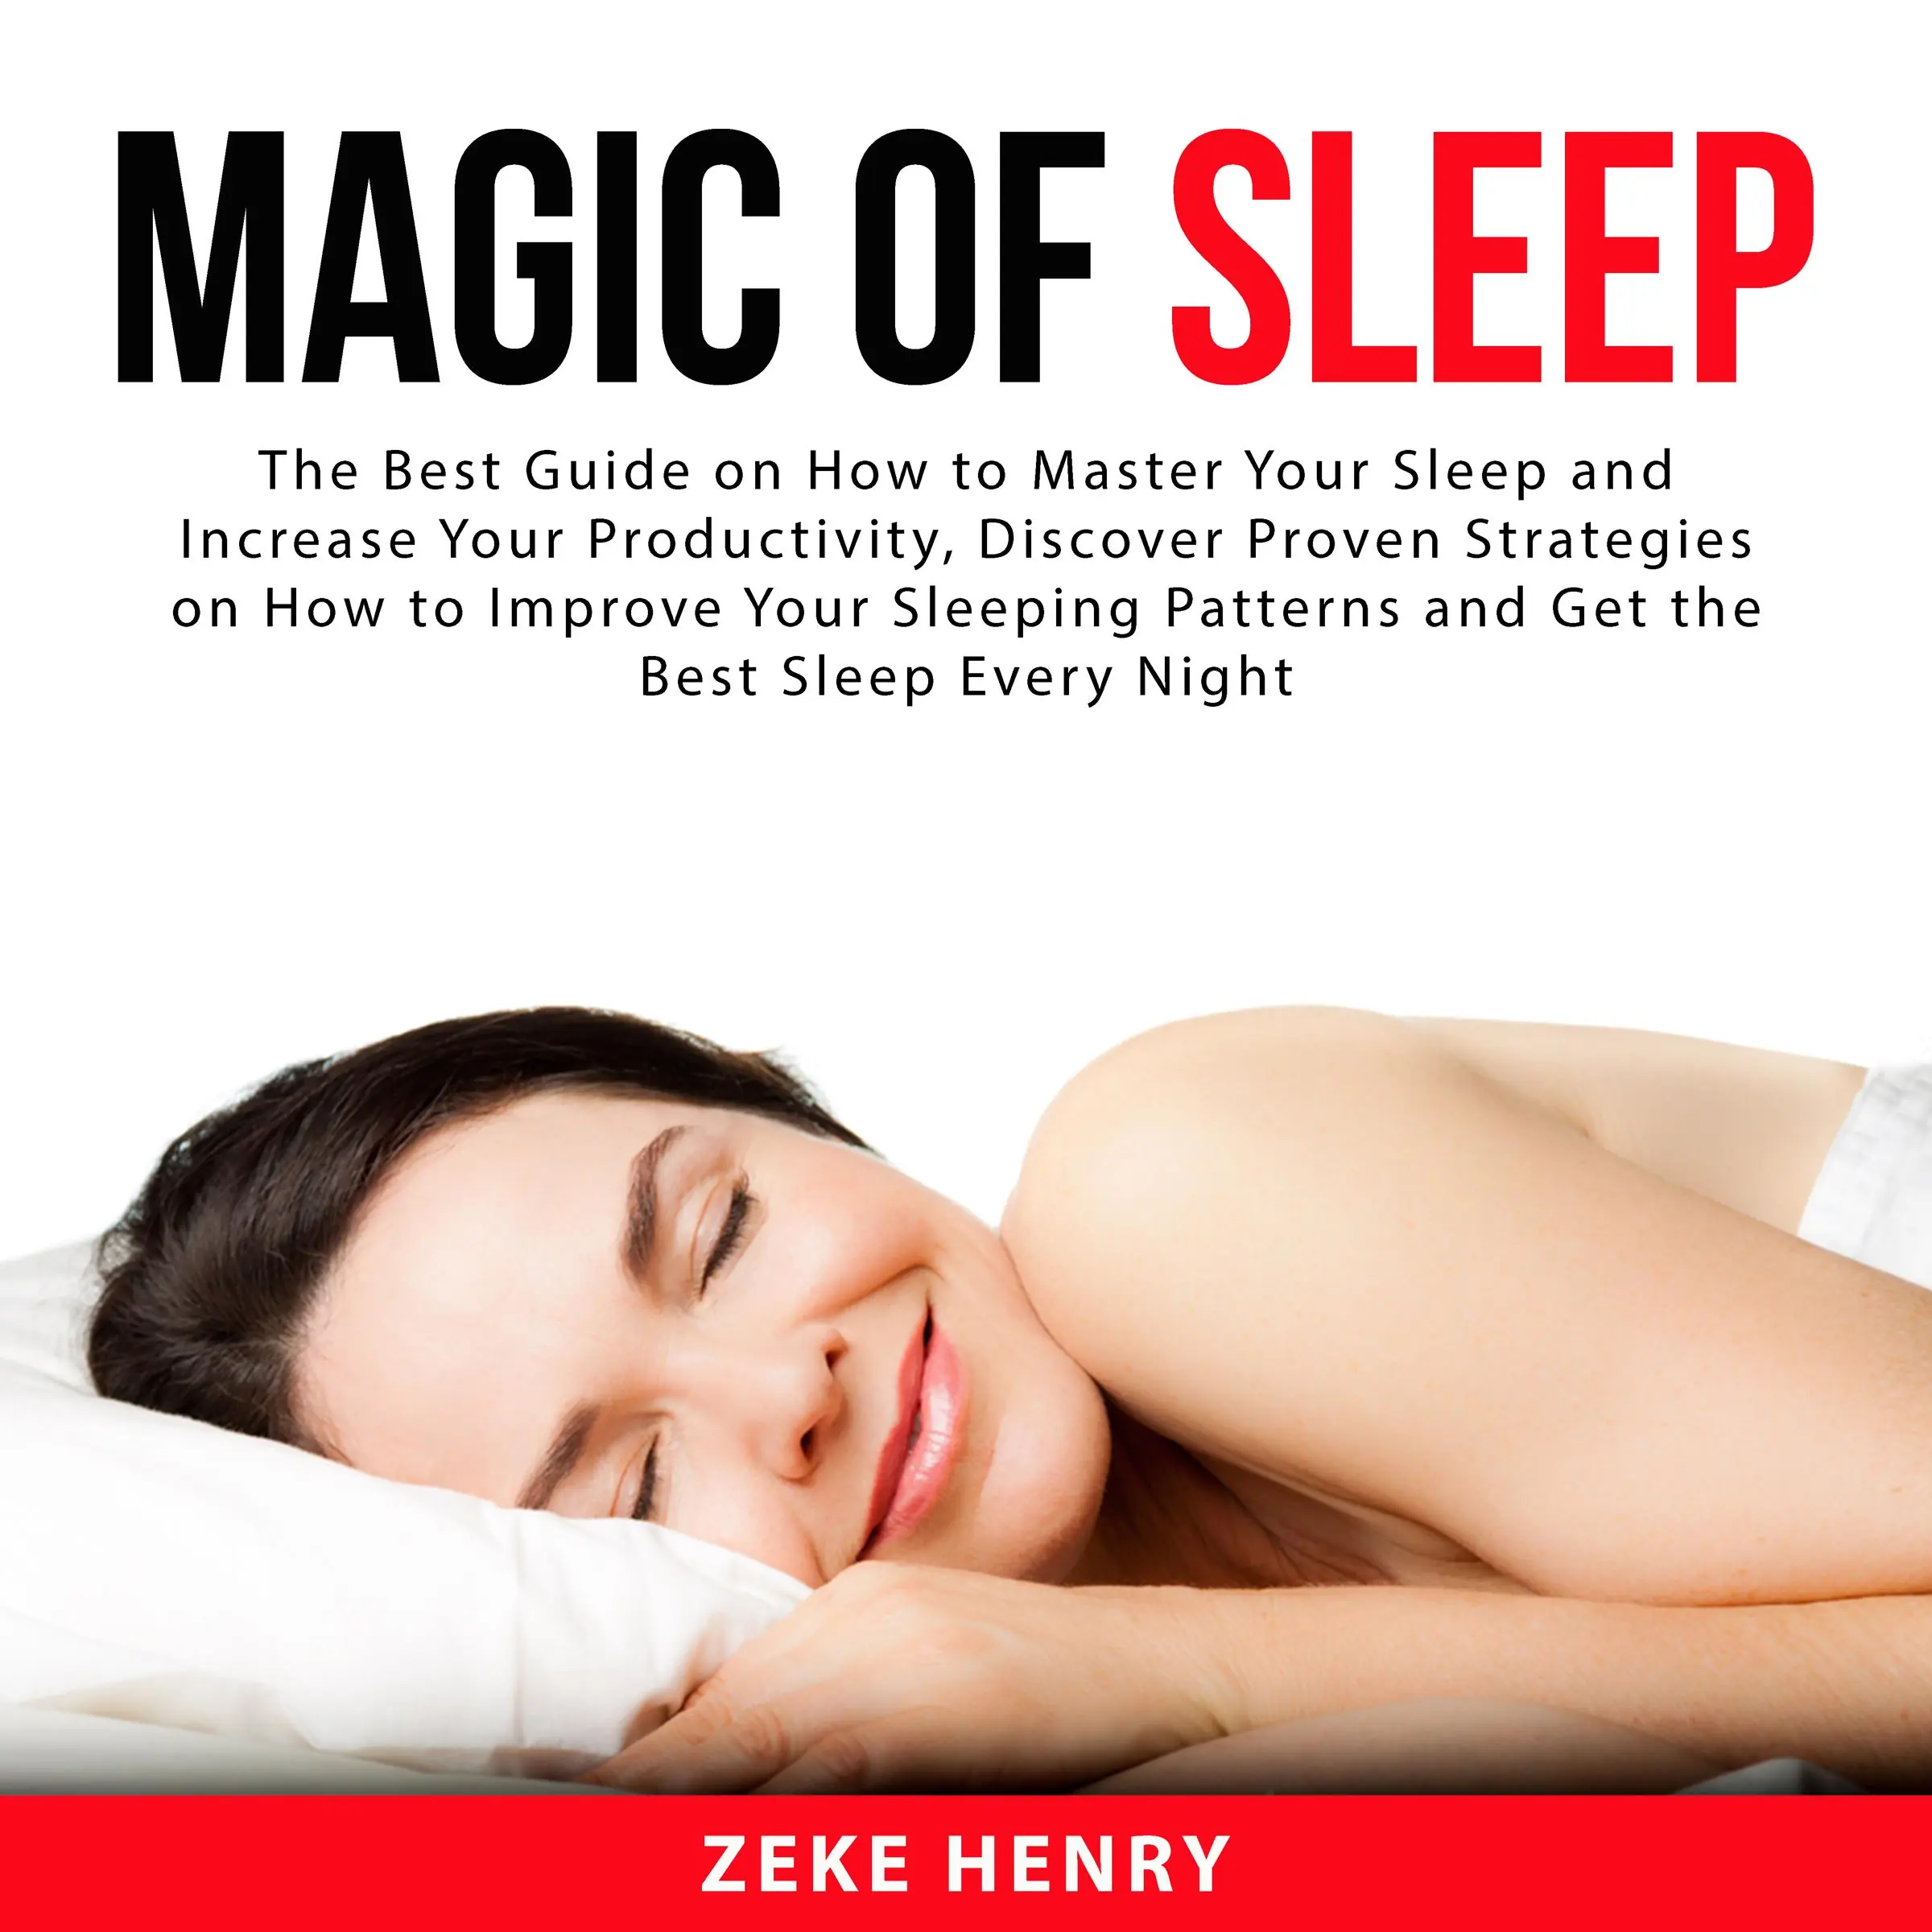 Magic of Sleep: The Best Guide on How to Master Your Sleep and Increase Your Productivity, Discover Proven Strategies on How to Improve Your Sleeping Patterns and Get the Best Sleep Every Night Audiobook by Zeke Henry